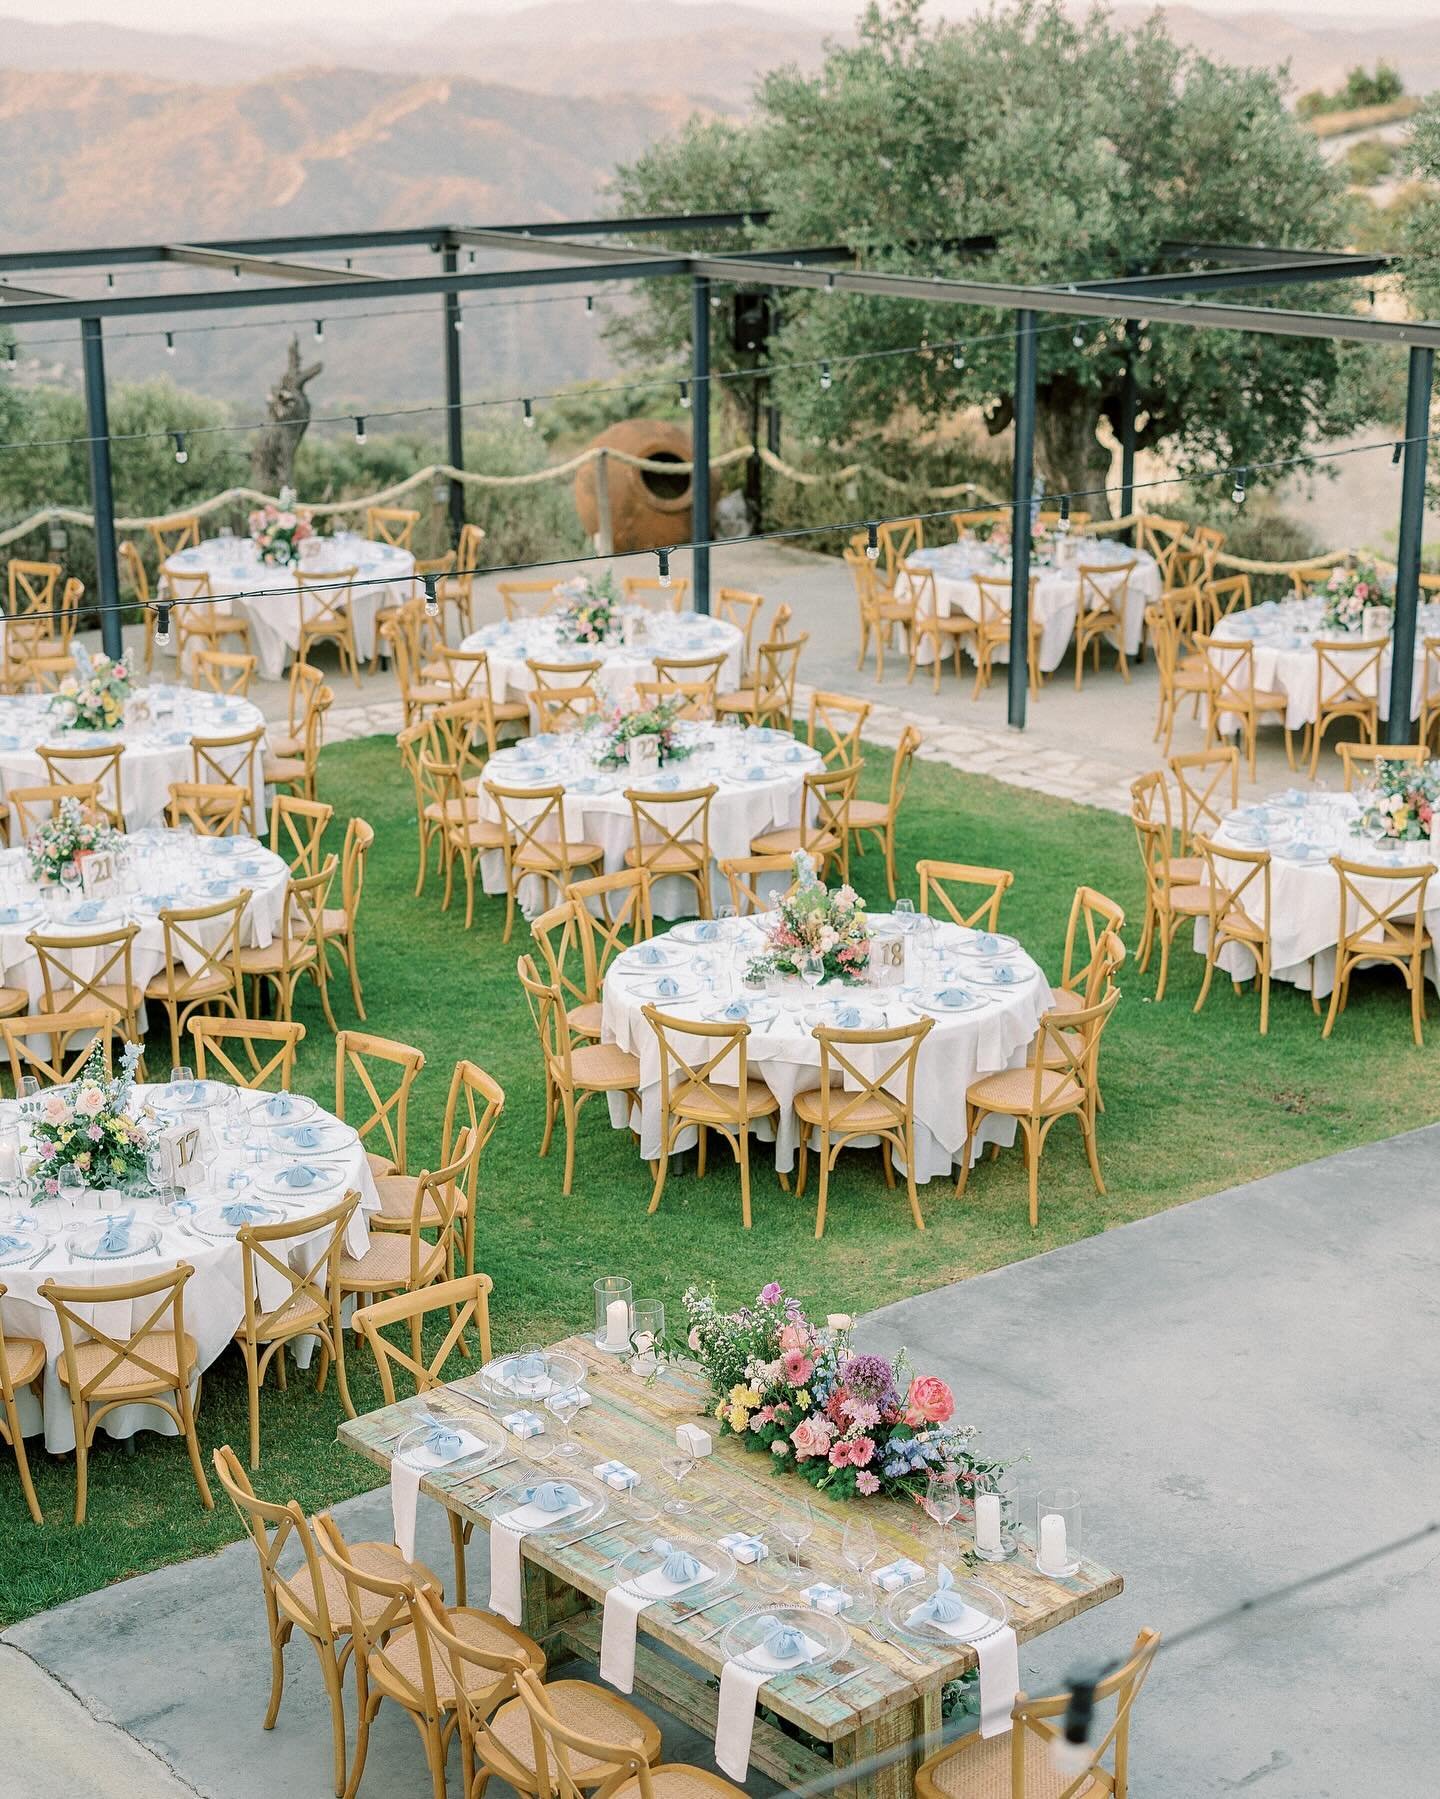 Cheers to love blossoming like vibrant summer flowers amidst the picturesque vineyards of @dafermouwinery at Lefkara, Cyprus. Raising a glass to the incredible team of @missplanner_events who orchestrated every detail flawlessly, turning dreams into 